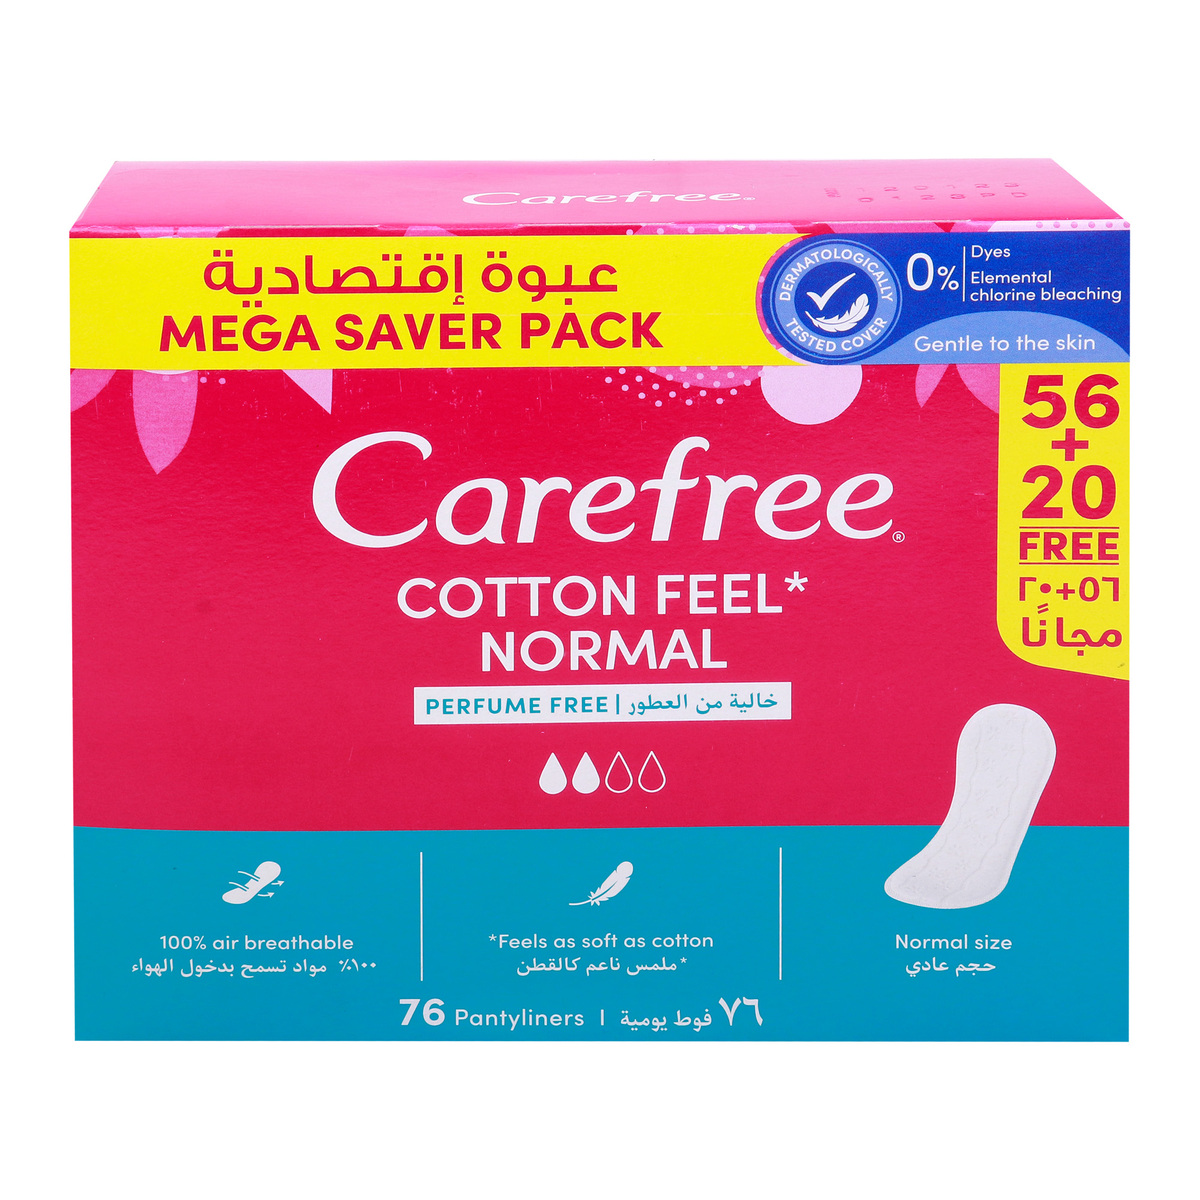 Buy Carefree Super Dry Unscented Panty Liners 20 pcs Online at